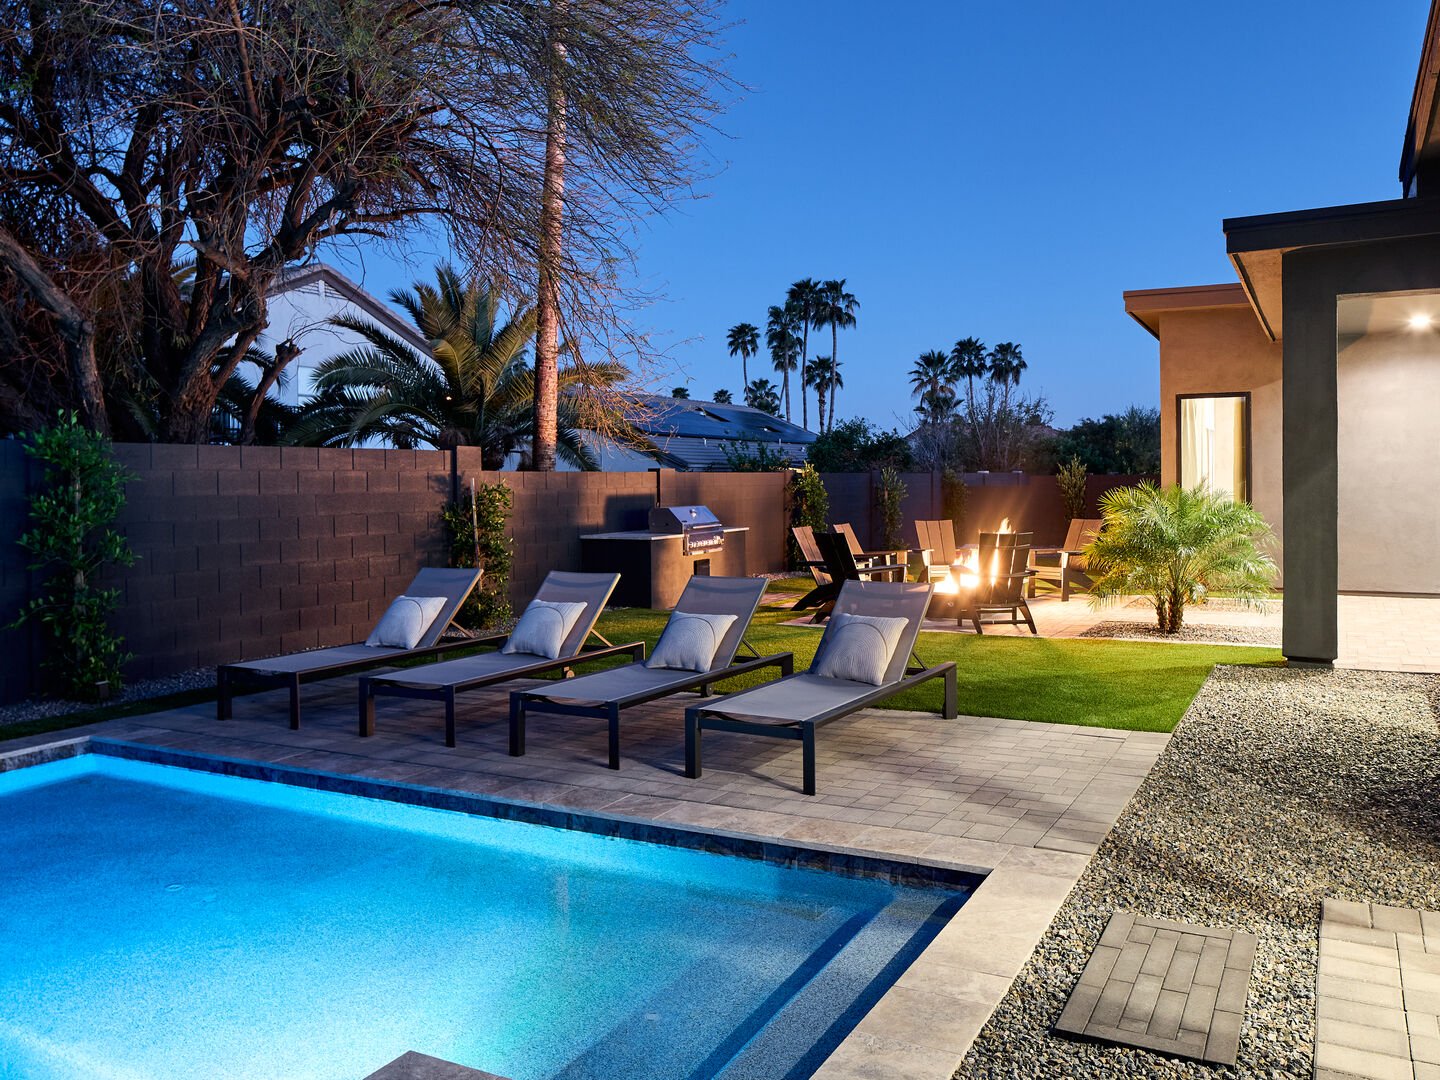 Resort-like backyard with a covered patio offering outdoor dining, a sparkling blue heated pool with sun loungers, yard games, a BBQ grill and a fire pit.